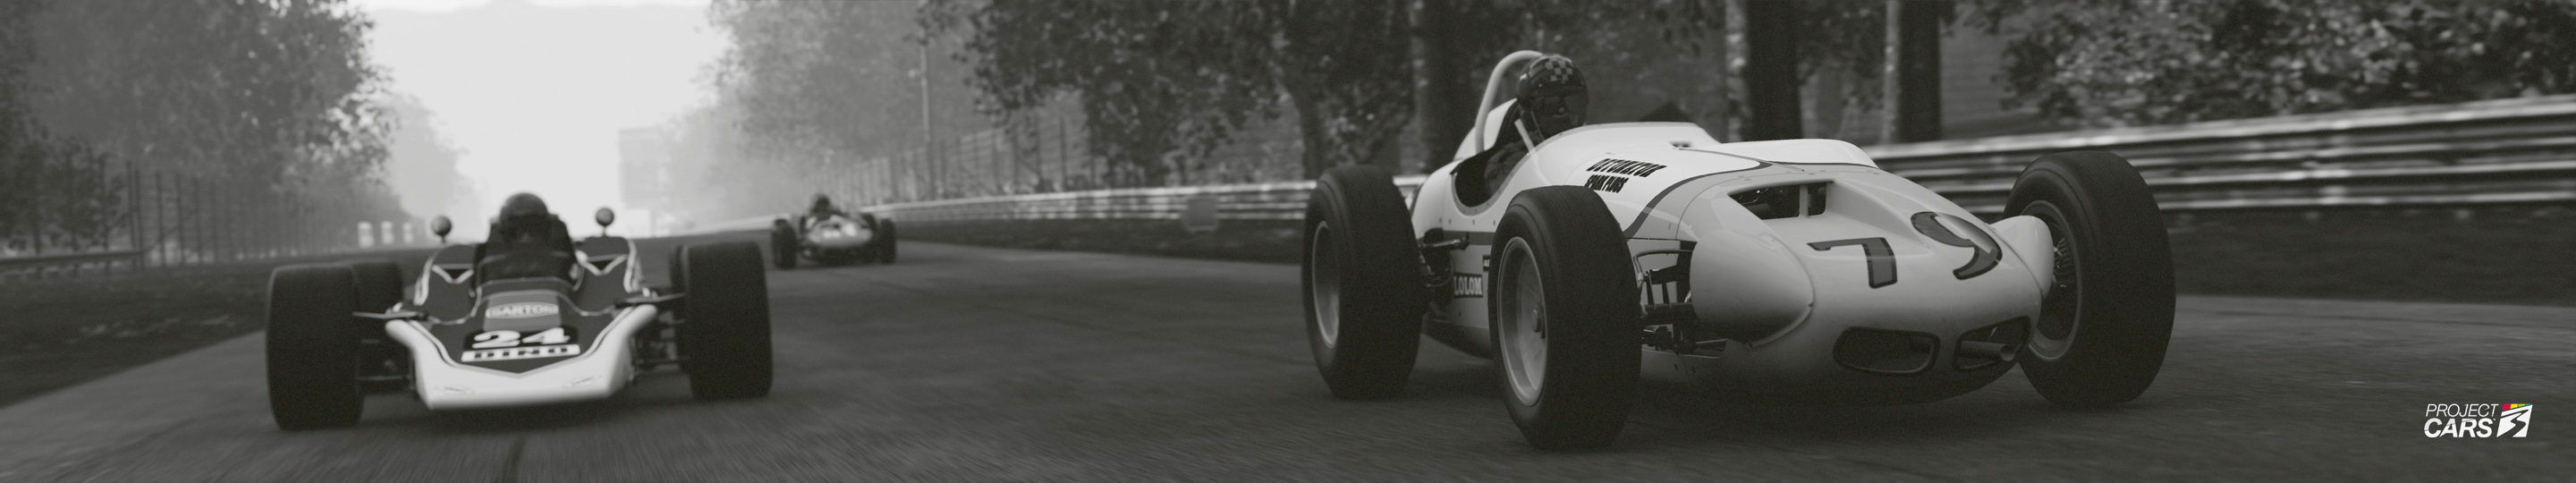 3 PROJECT CARS 3 WATSON ROADSTER at MONZA HISTORIC copy.jpg